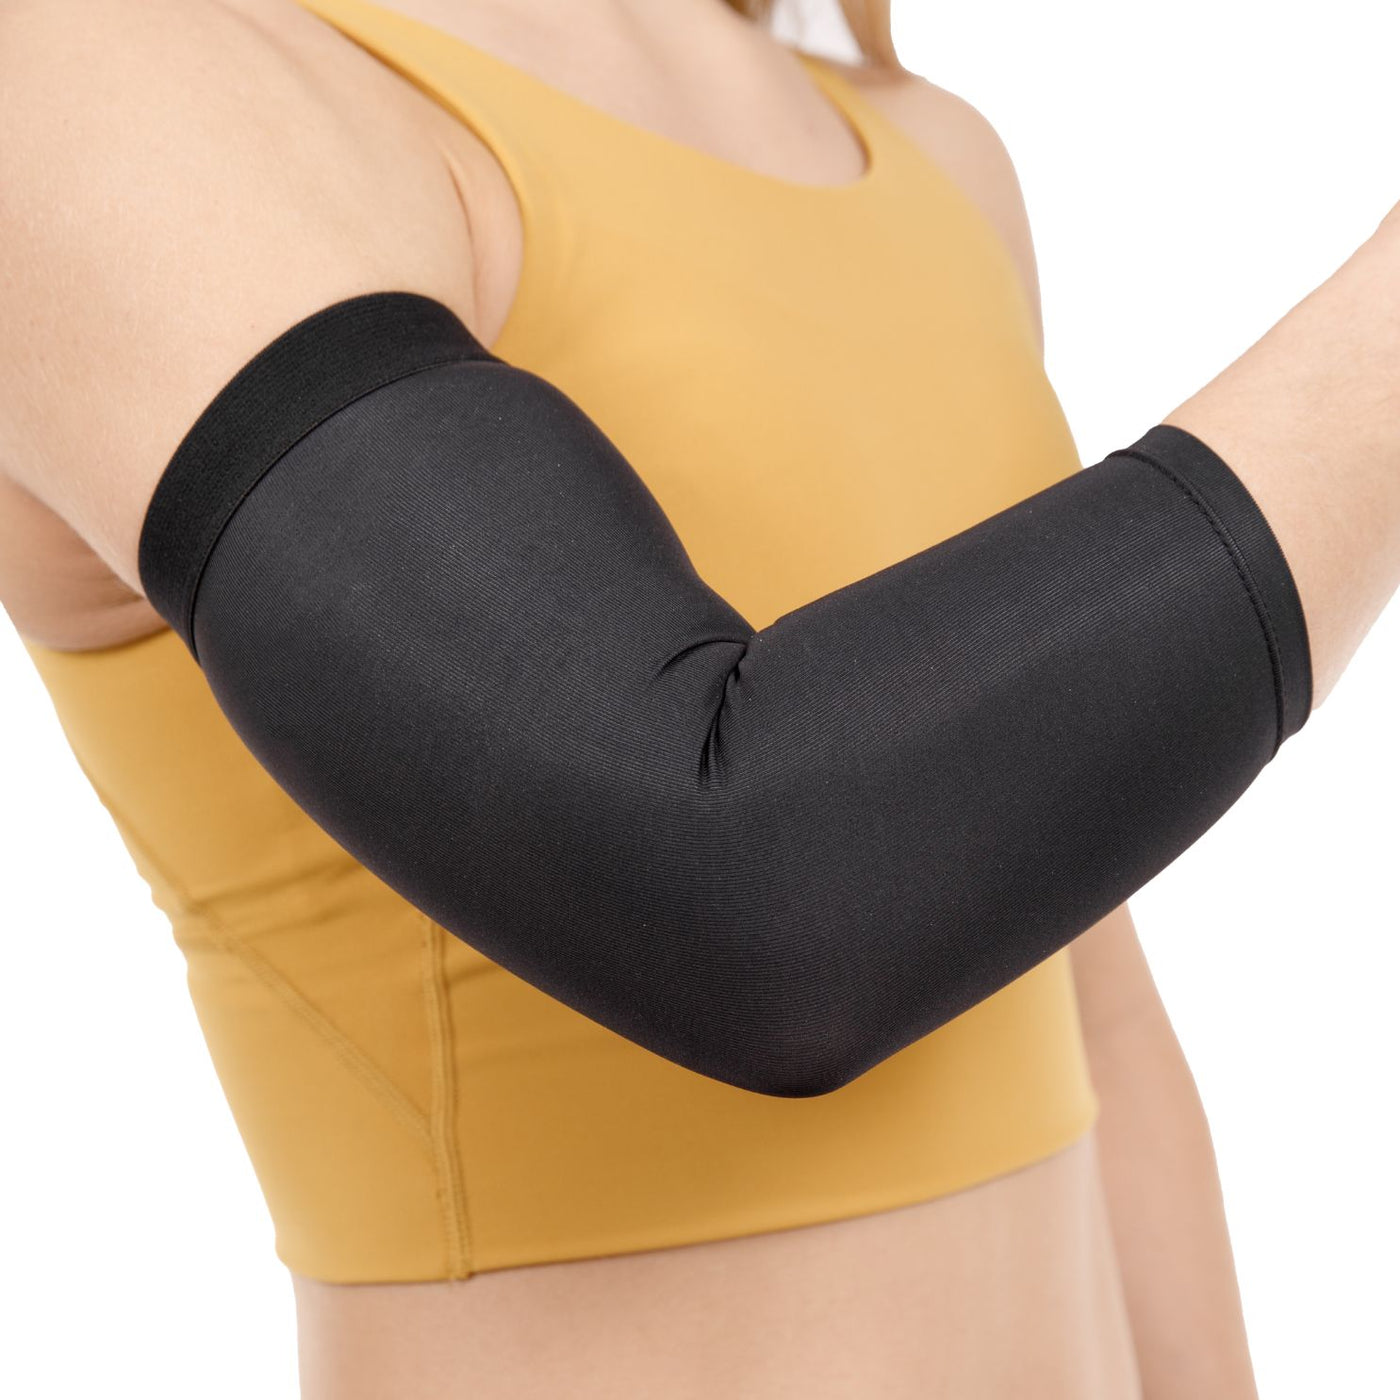  Copper Fit Unisex Adult ICE Elbow Compression Sleeve